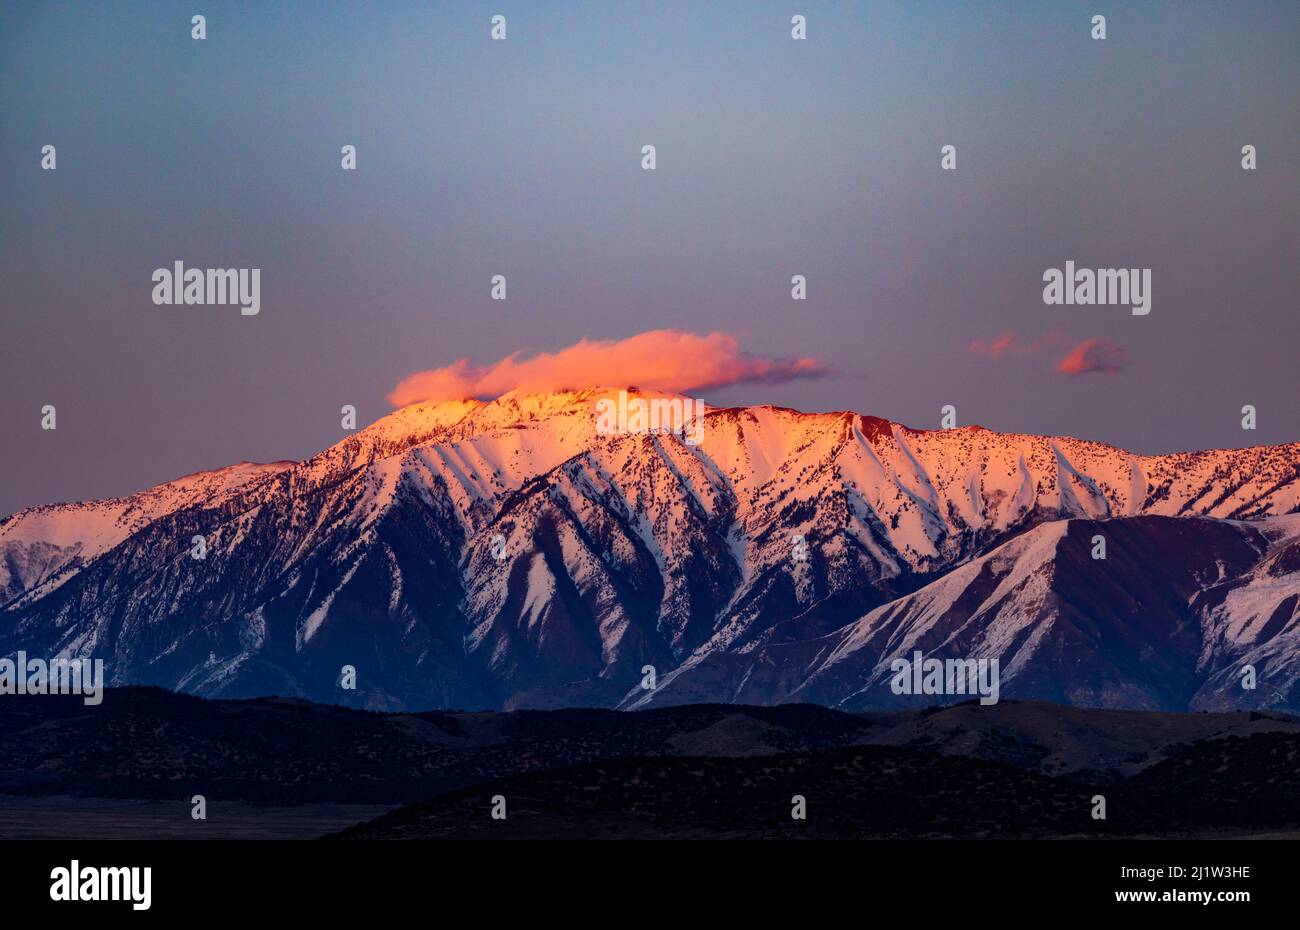 The pink light of the setting sun lights up a cloud over the three peaks of snow-capped Mount Nebo near Nephi, Utah, USA as seen from the west. Mount Stock Photo